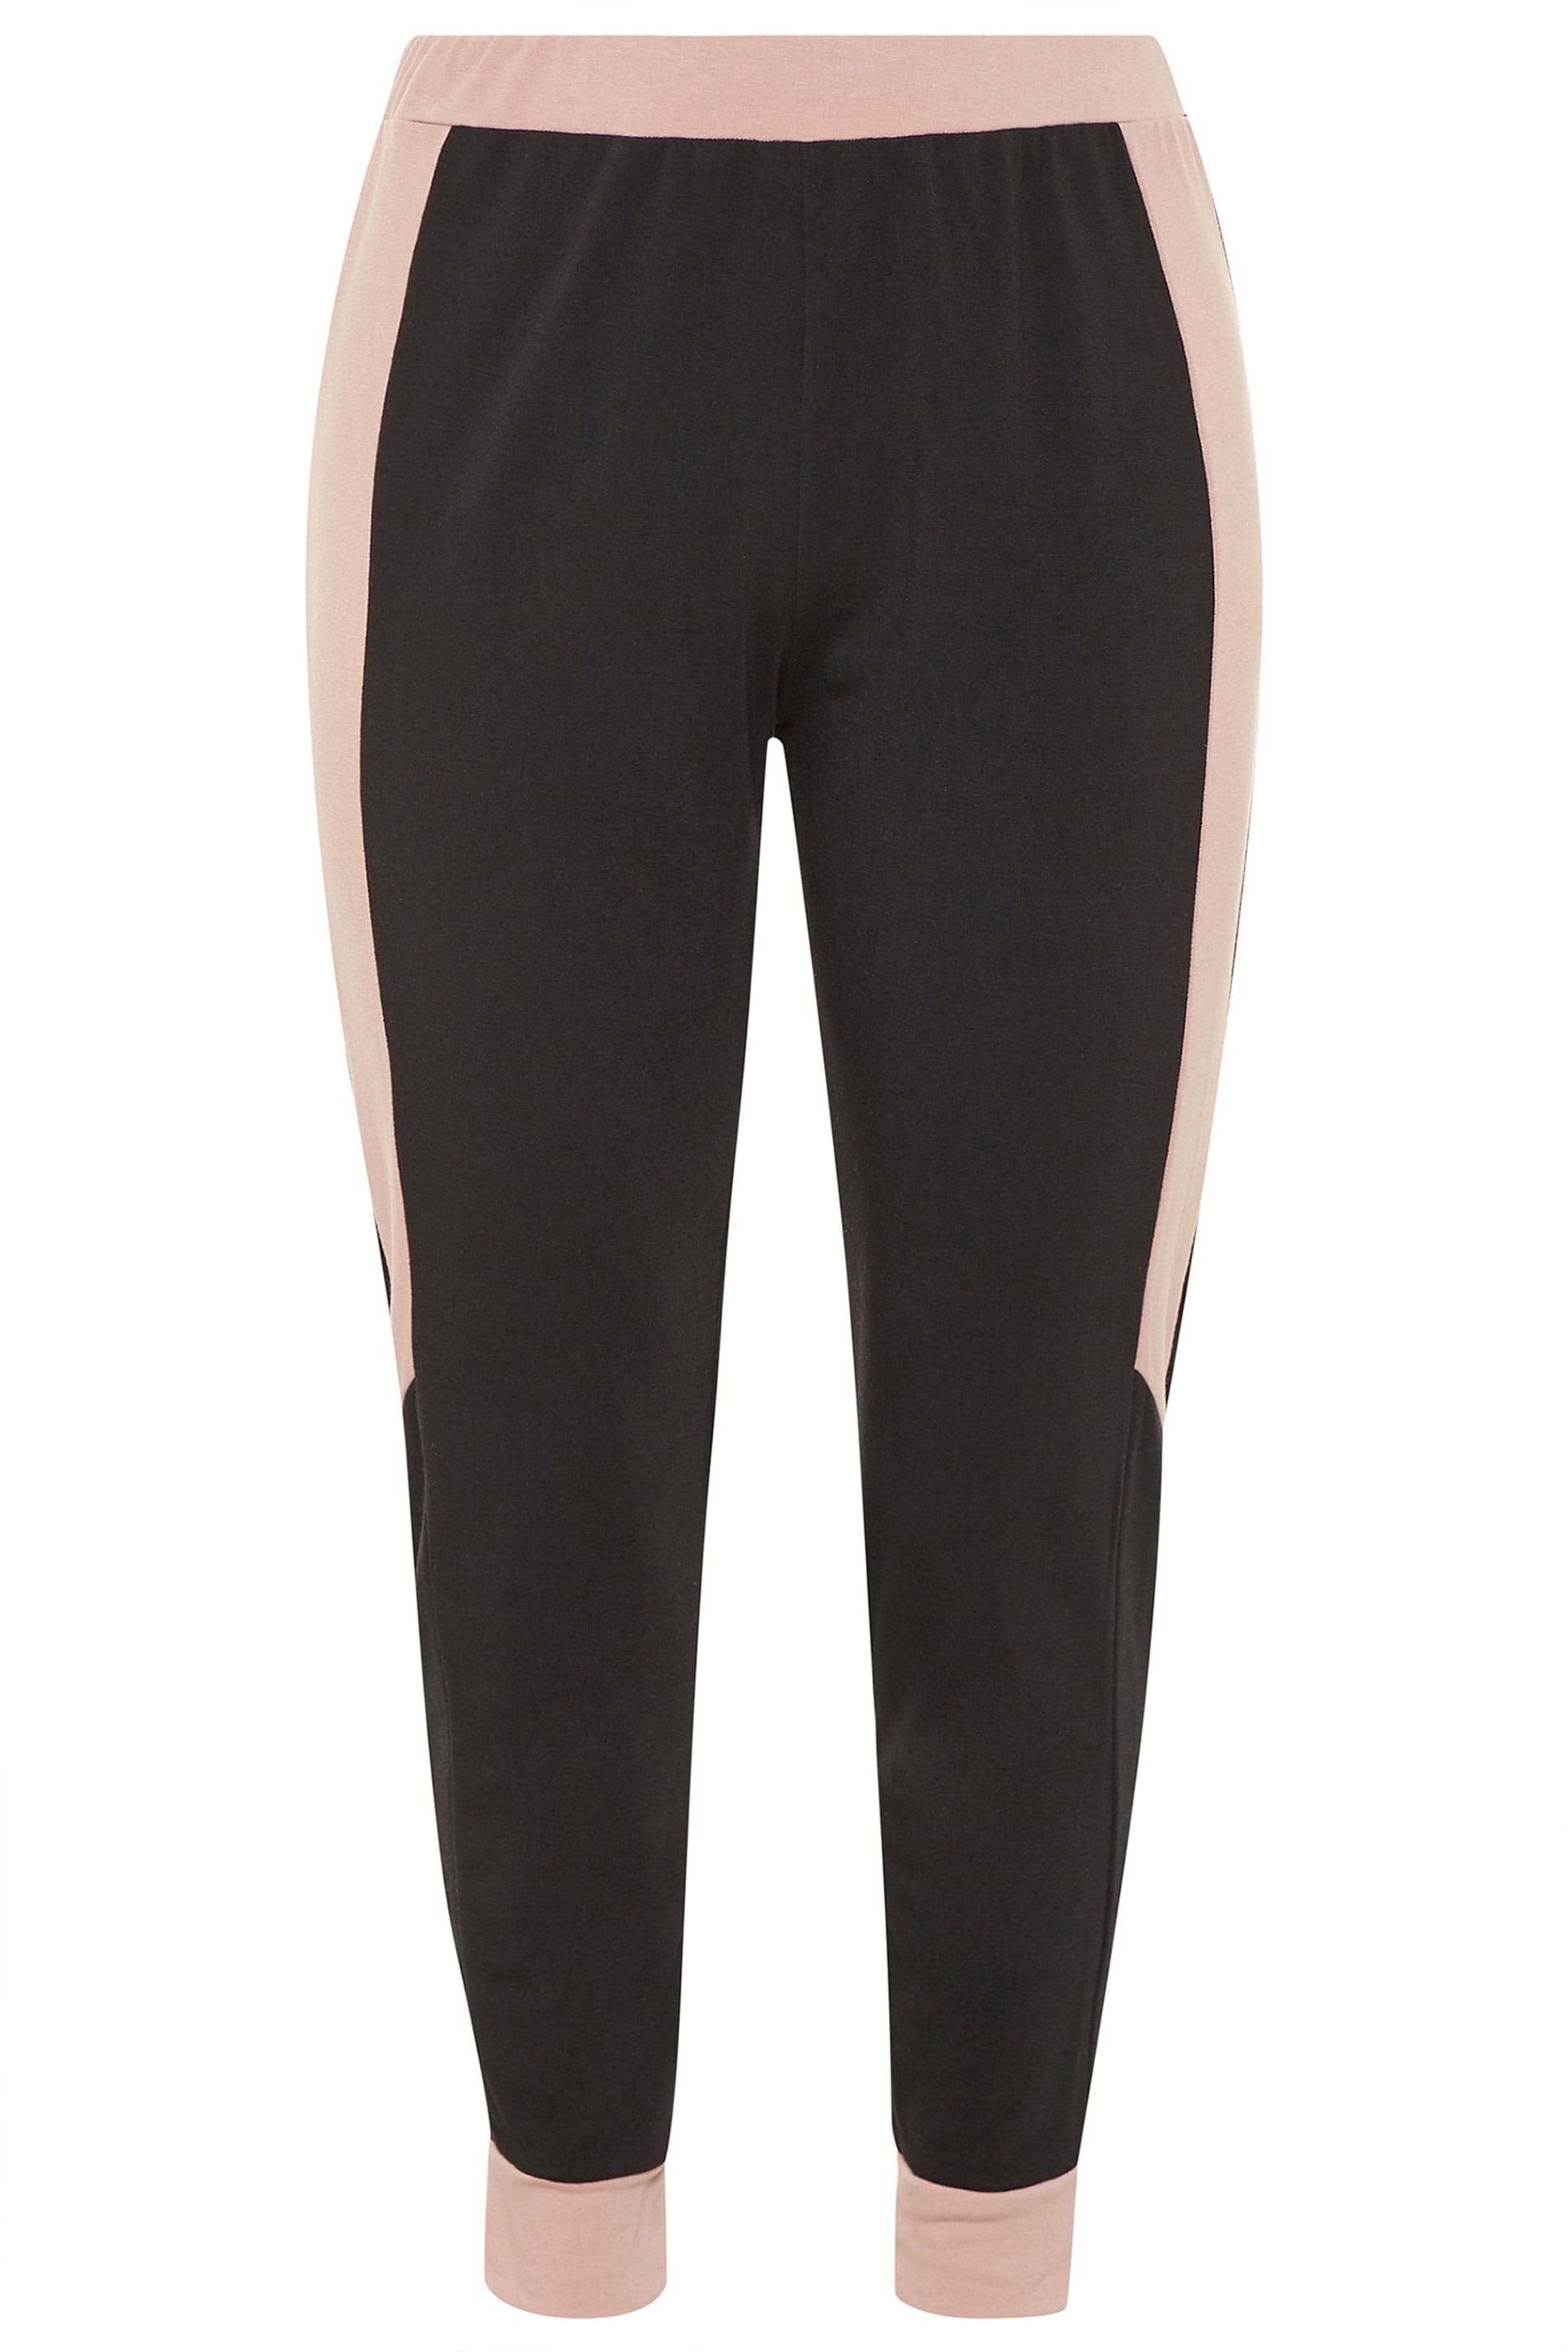 LIMITED COLLECTION Black & Blush Pink Colour Block Lounge Joggers ...